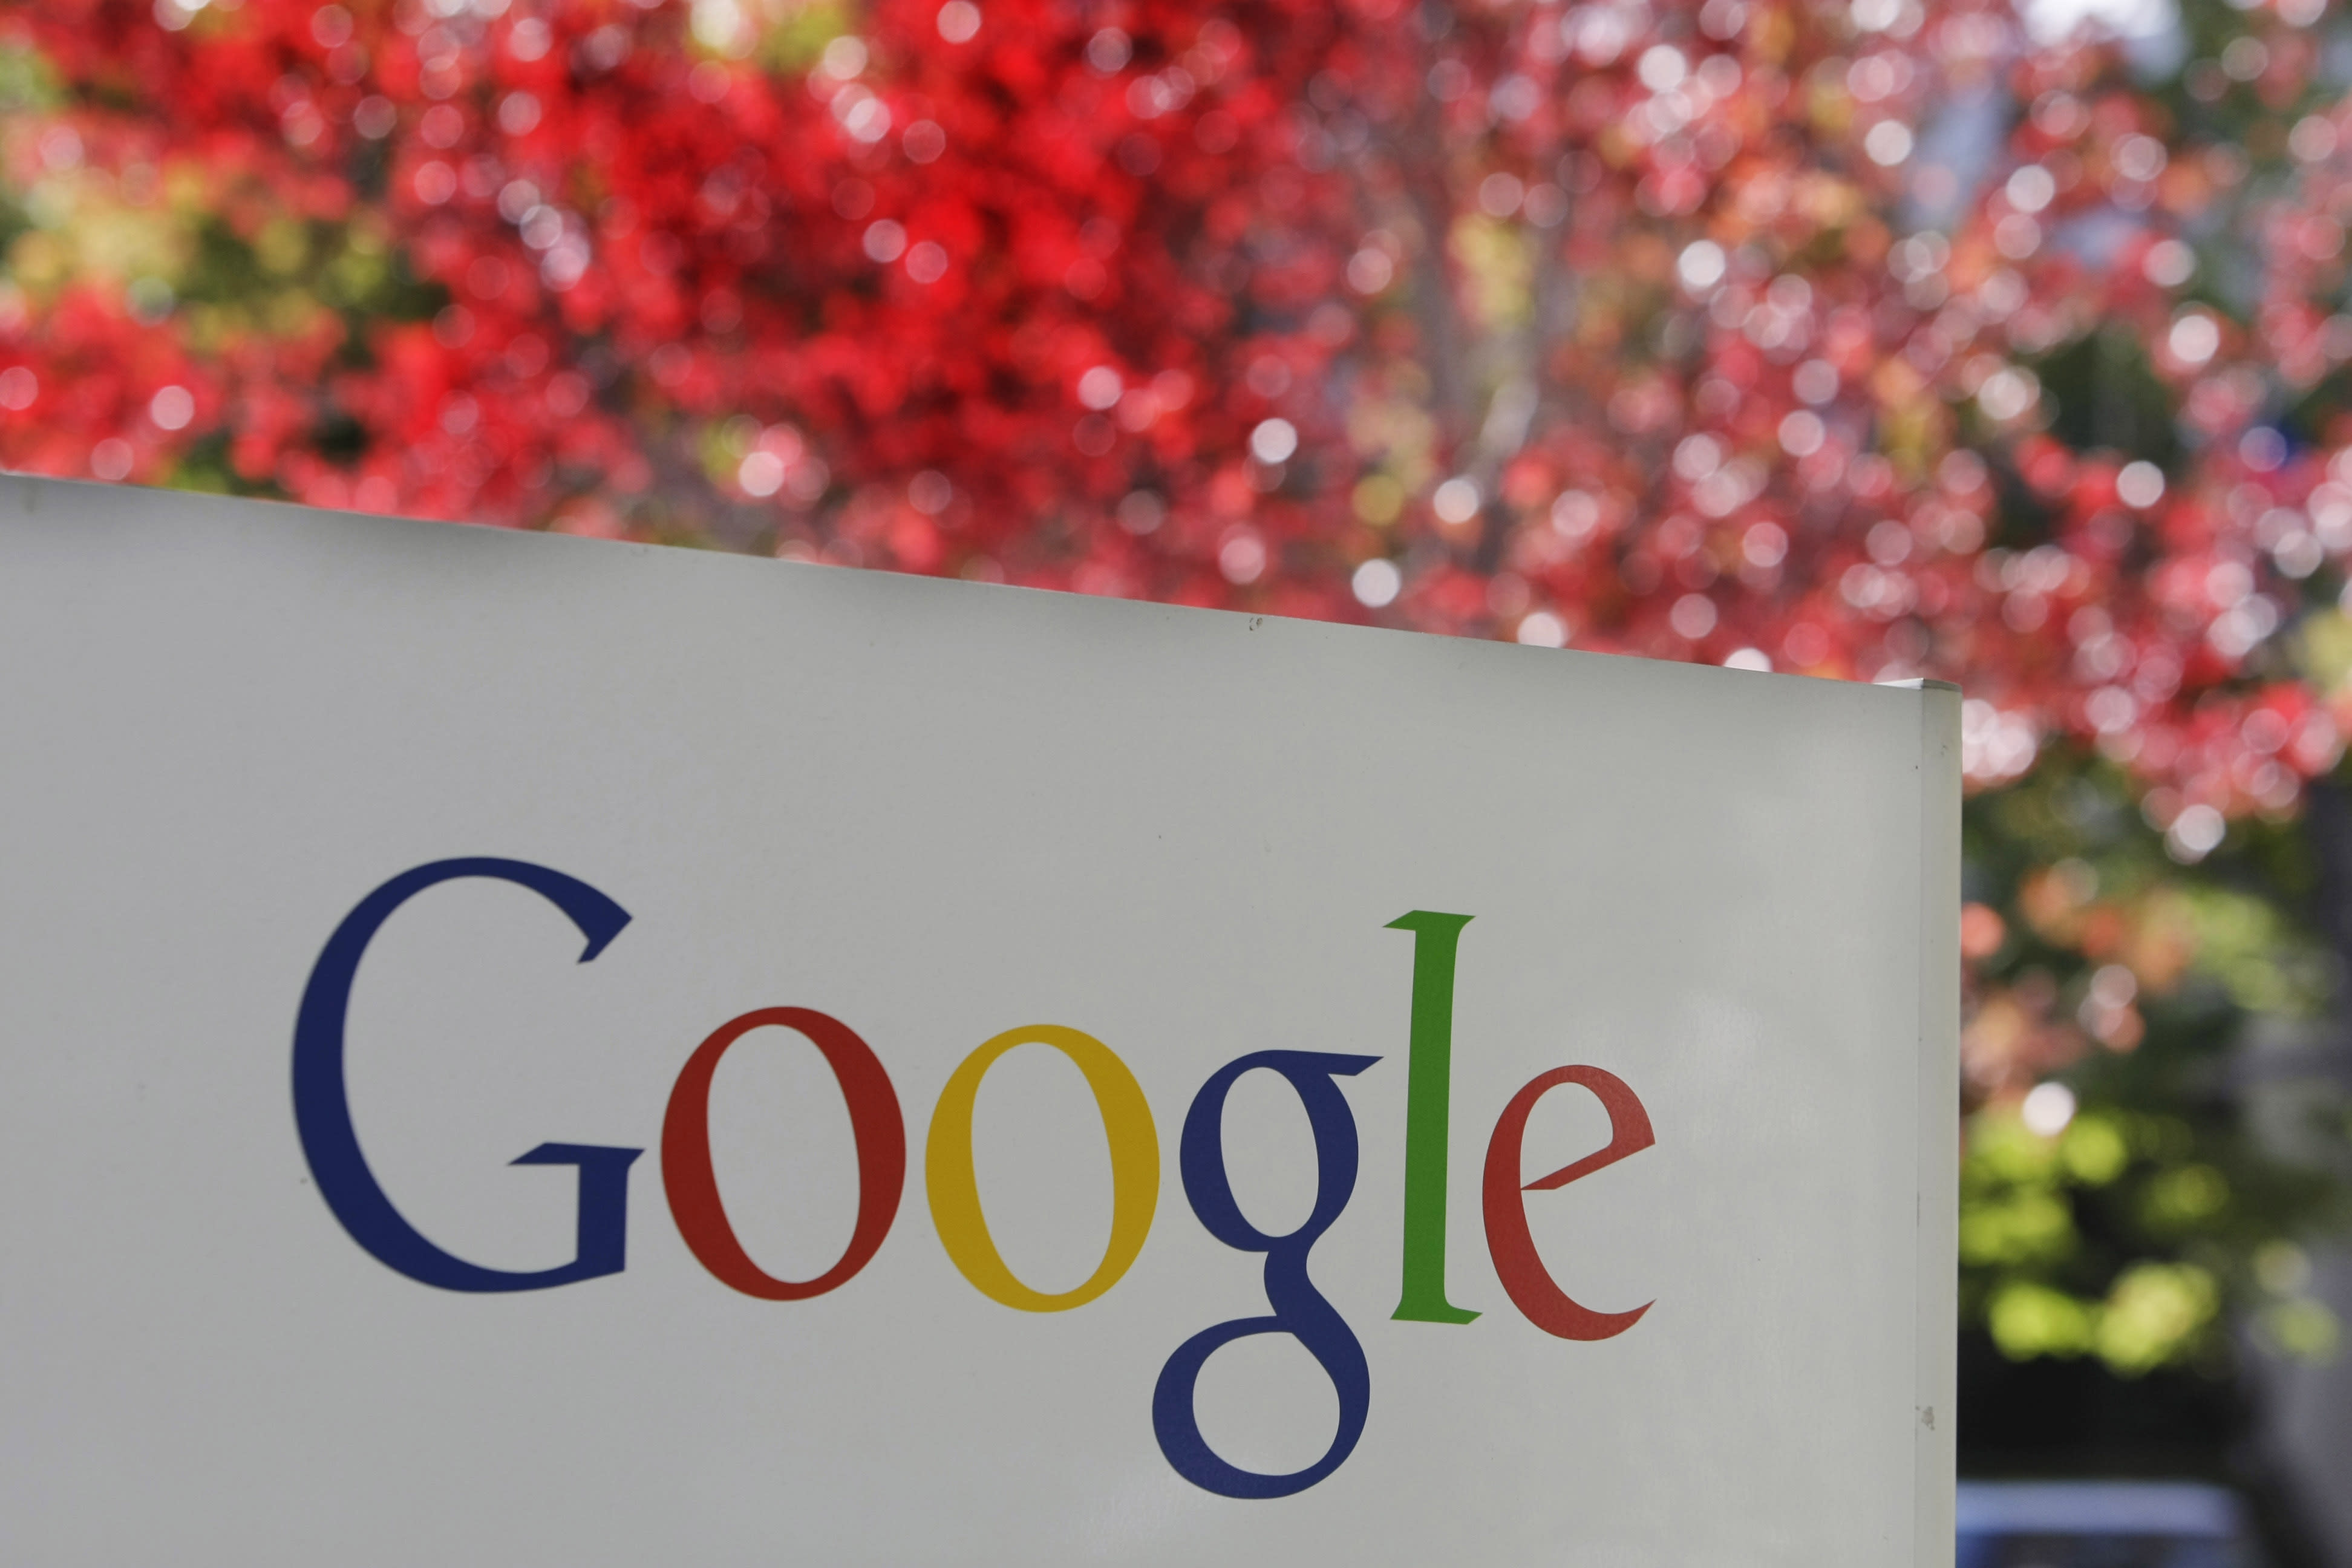 Scholar fired from think tank after criticizing Google [Video]